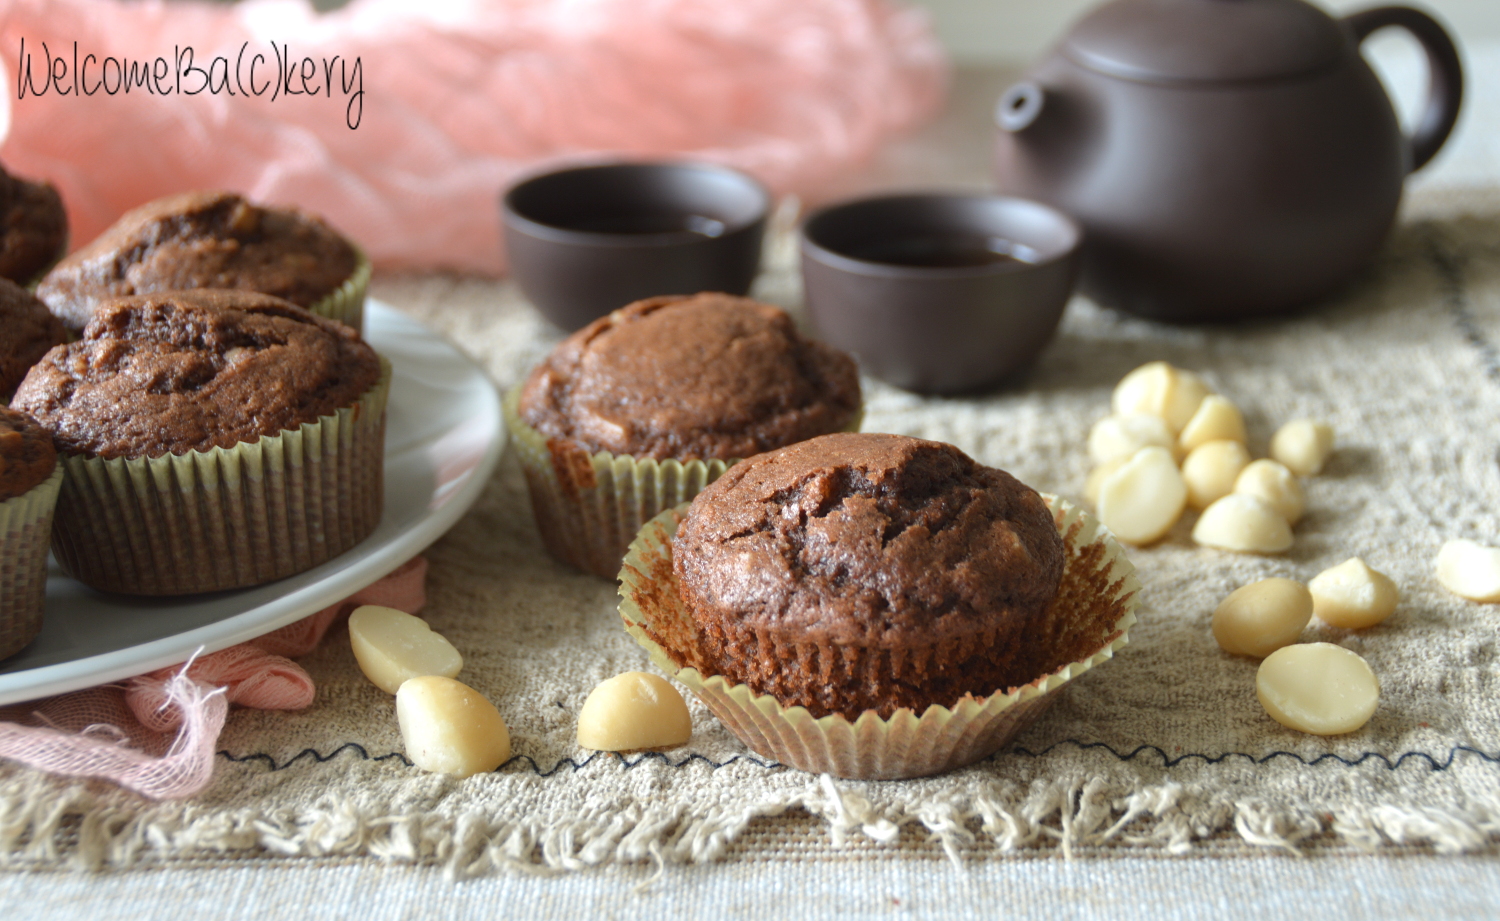 Cocoa muffins with Macadamia nuts